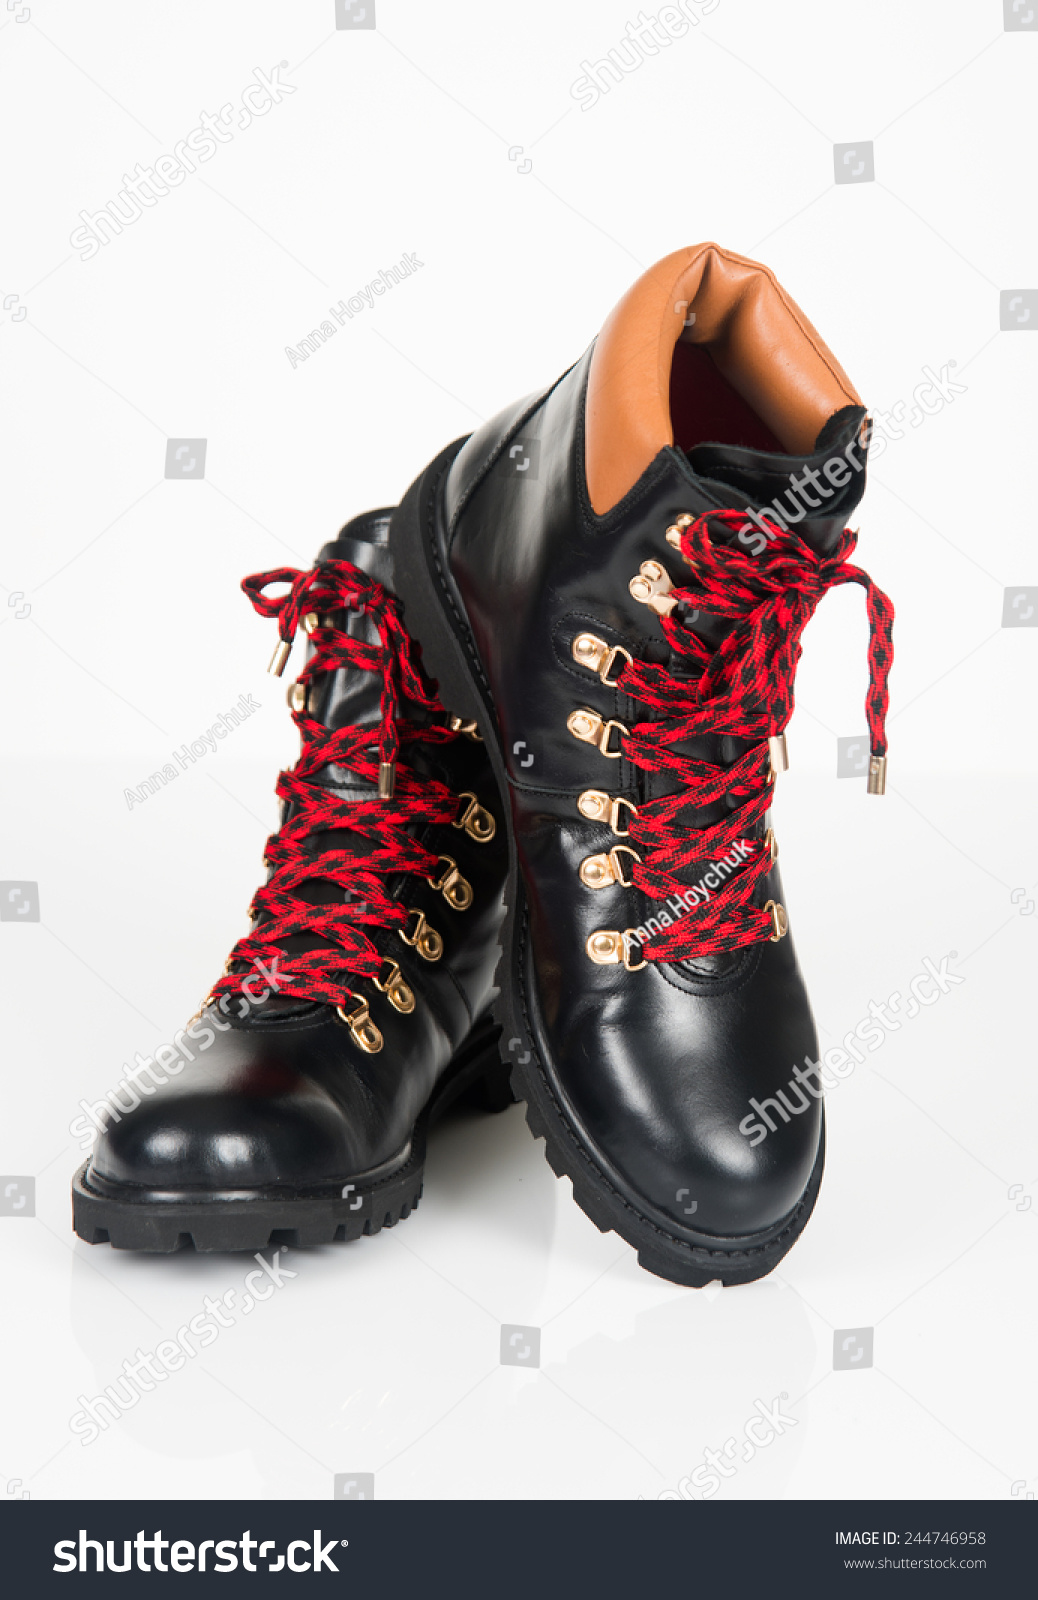 black hiking boots red laces